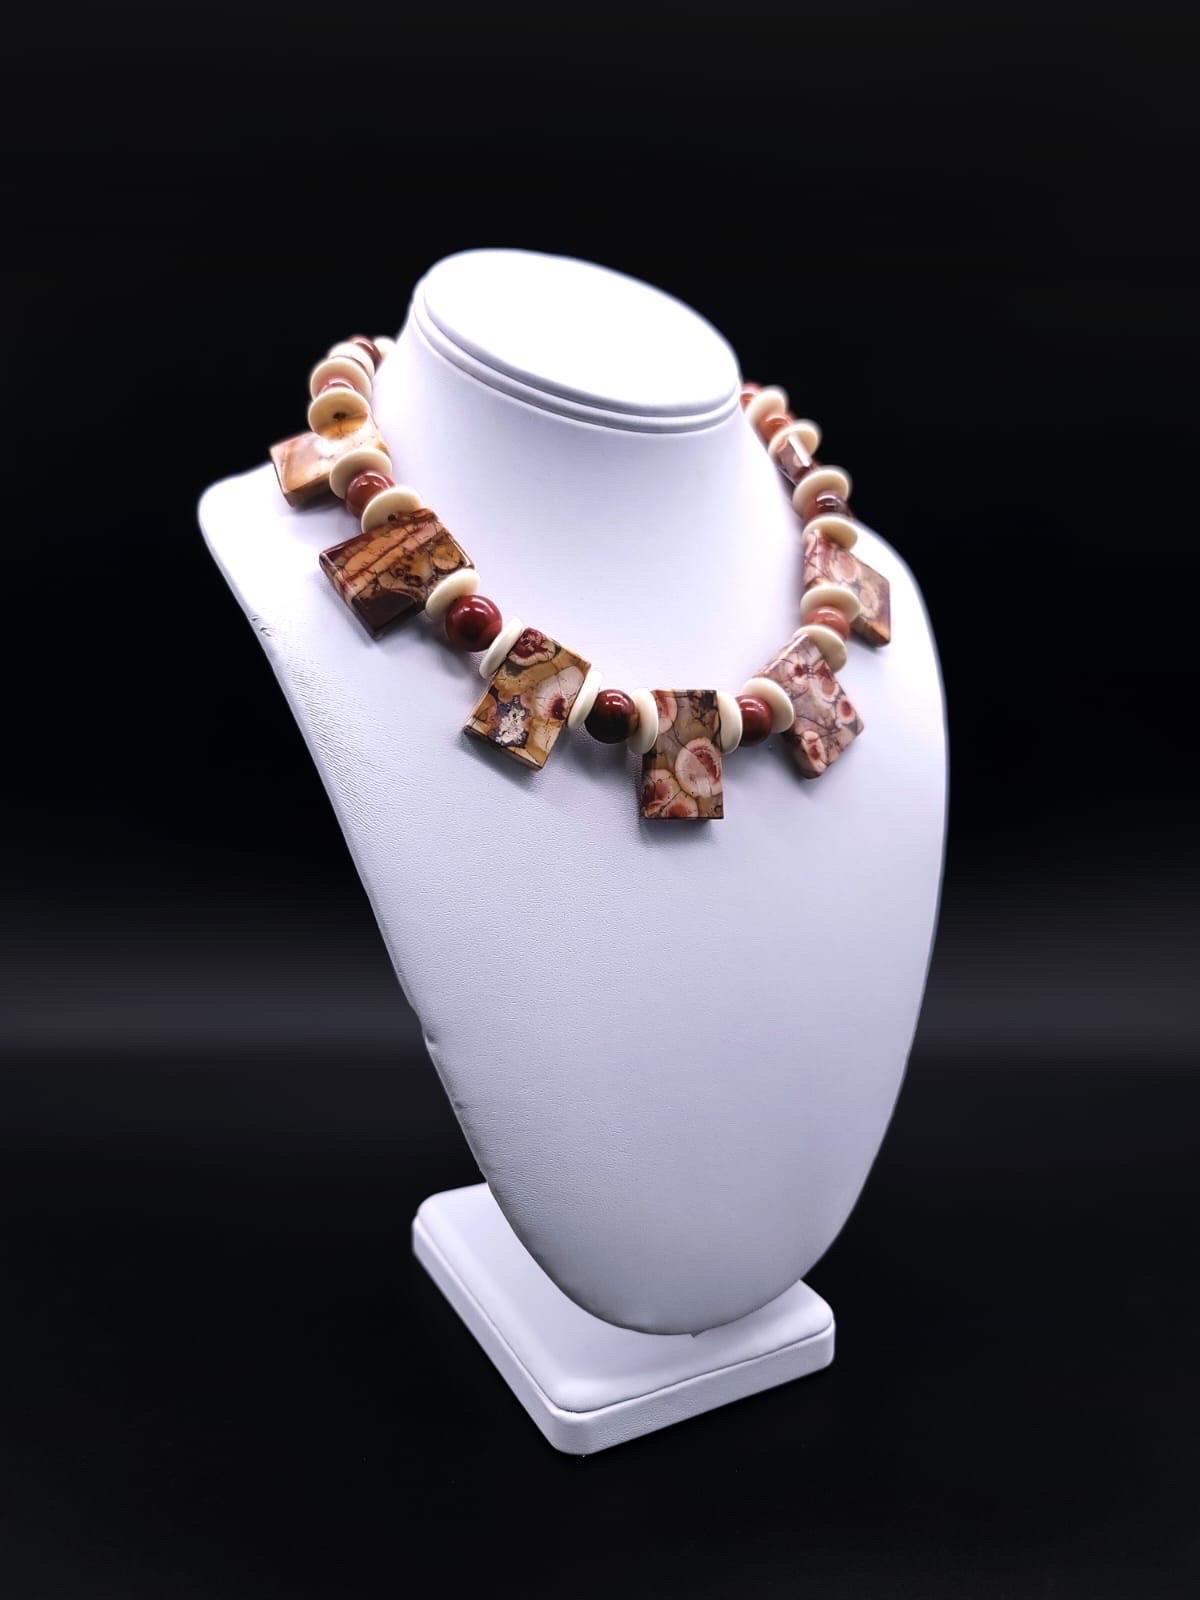 One-of-a-Kind

This necklace boasts a remarkable fusion of Corallia Jasper encircled by Aventurine beads and Fossil walrus bone in a harmonious blend echoing the centuries in the natural order. The polished stone, an agatized Jasper, creates a